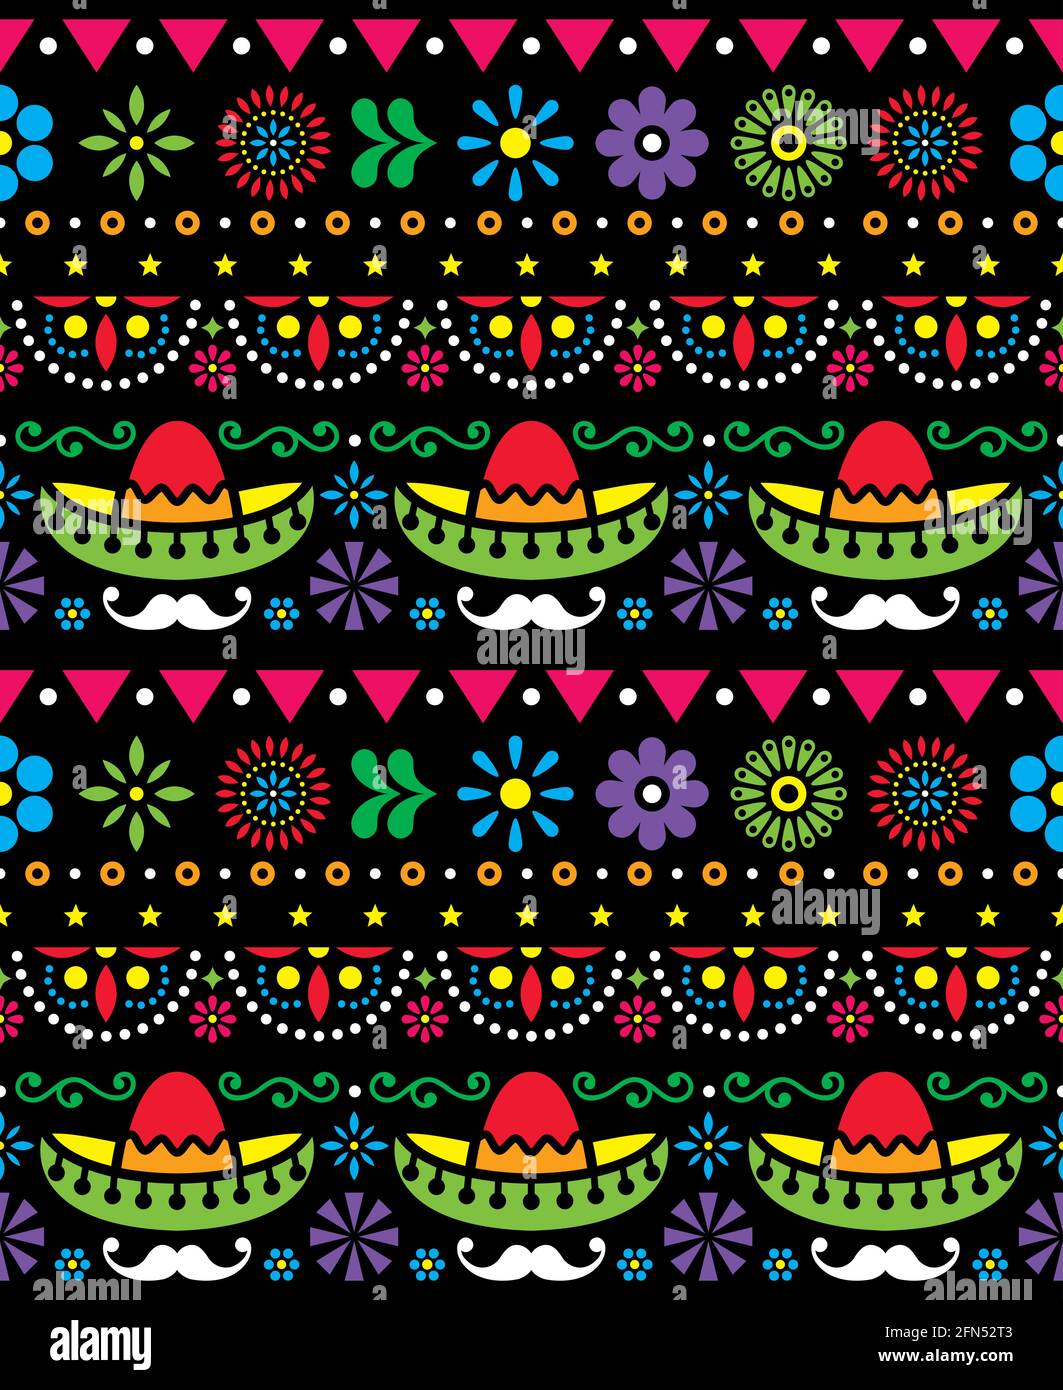 Mexican hat - sombrero and long mustache seamless vector floral pattern - textile, colorful design on black background Stock Vector